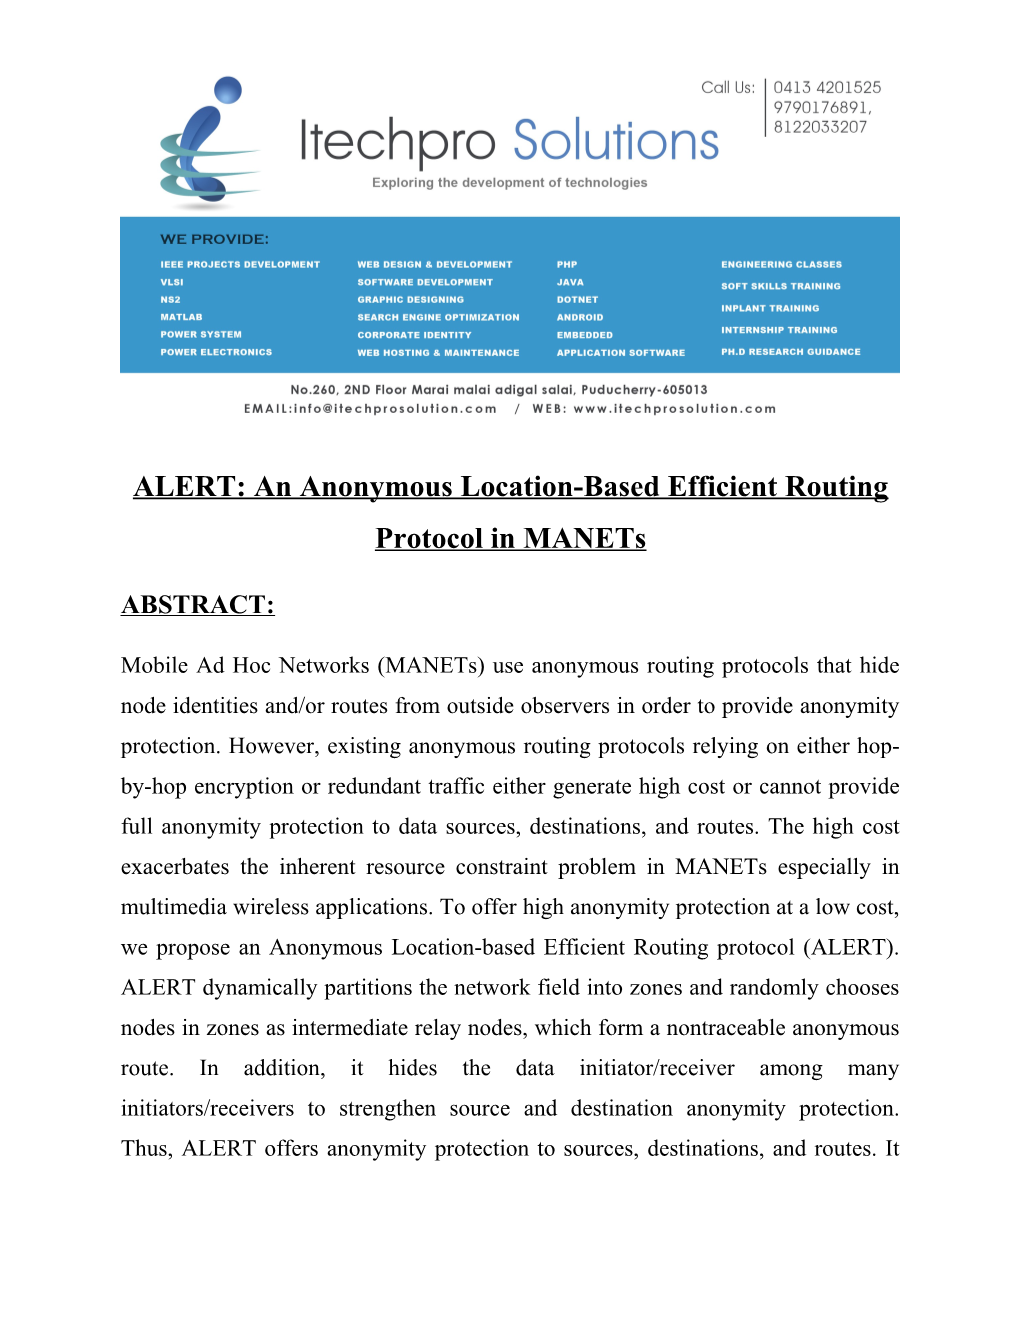 ALERT an Anonymous Location-Based Efficient Routing Protocol in Manets